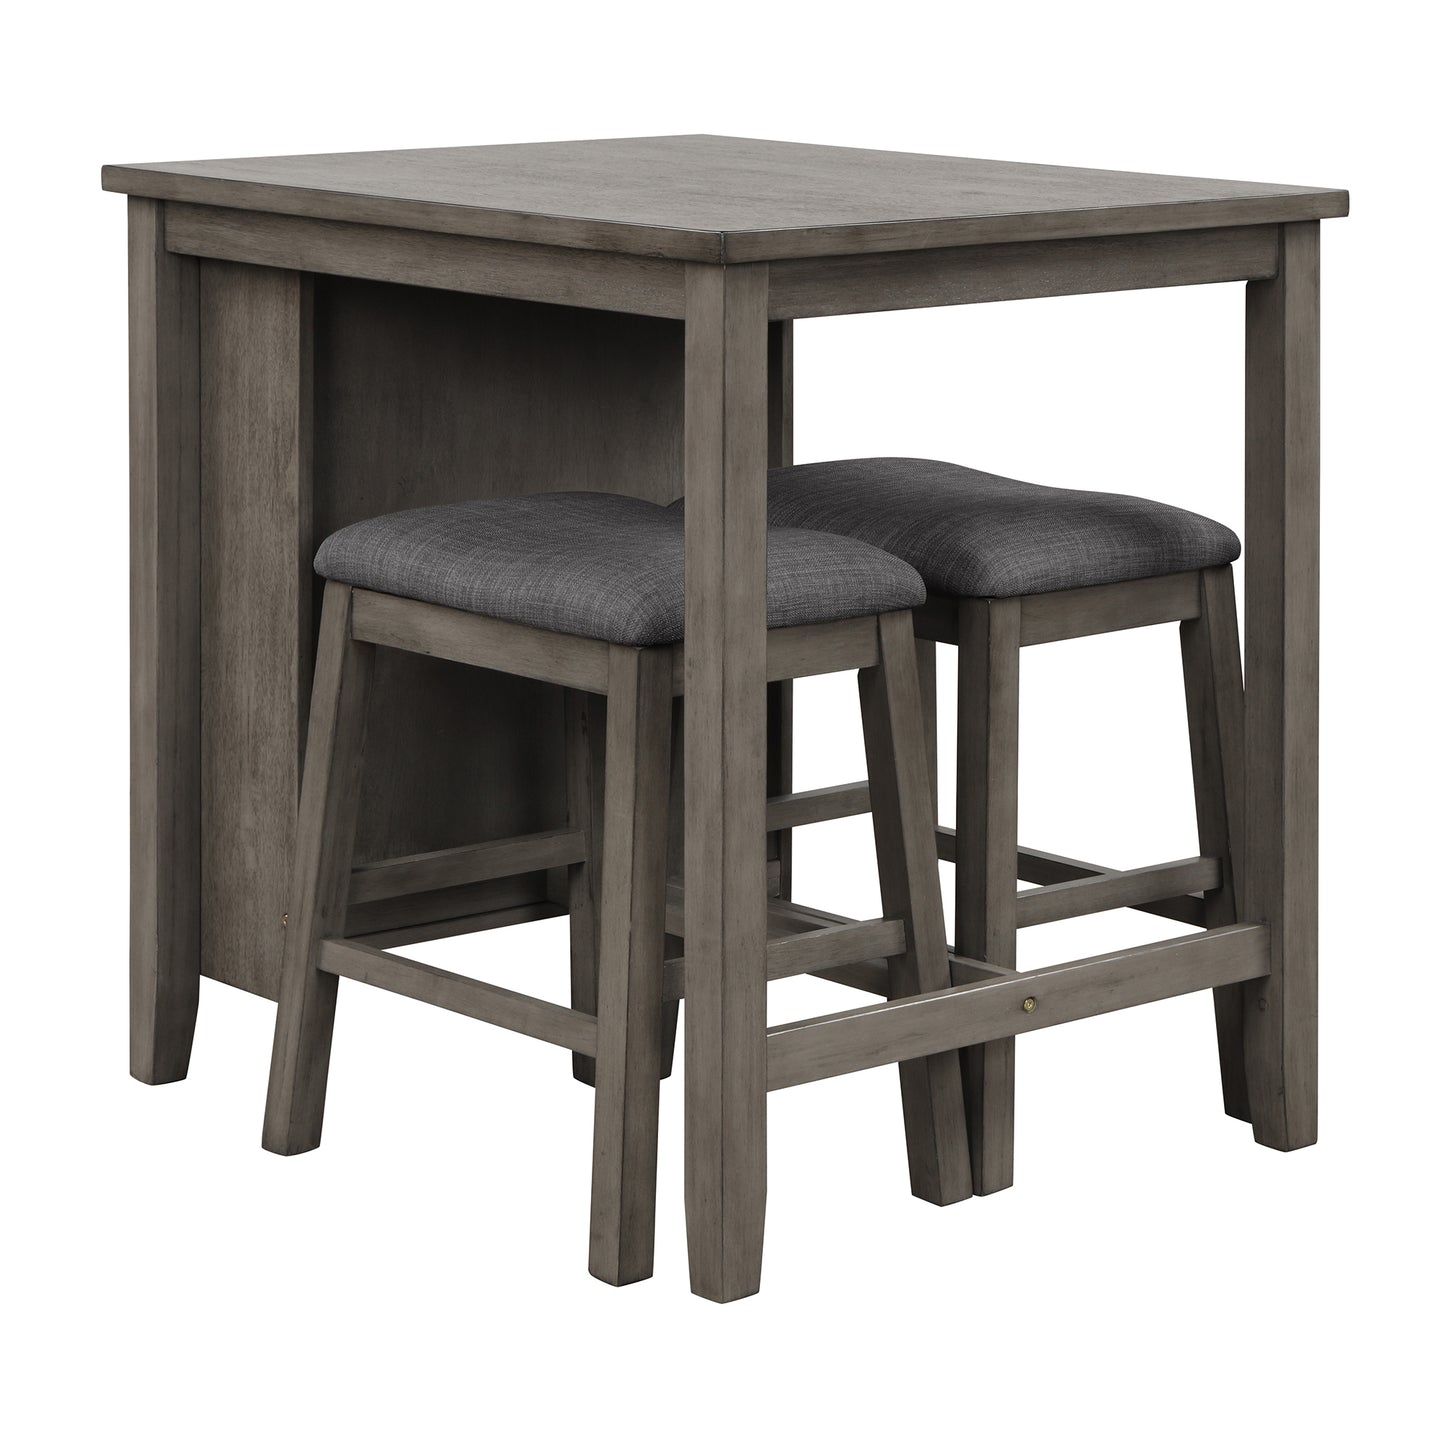 3 Piece Dining Table with Padded Stools